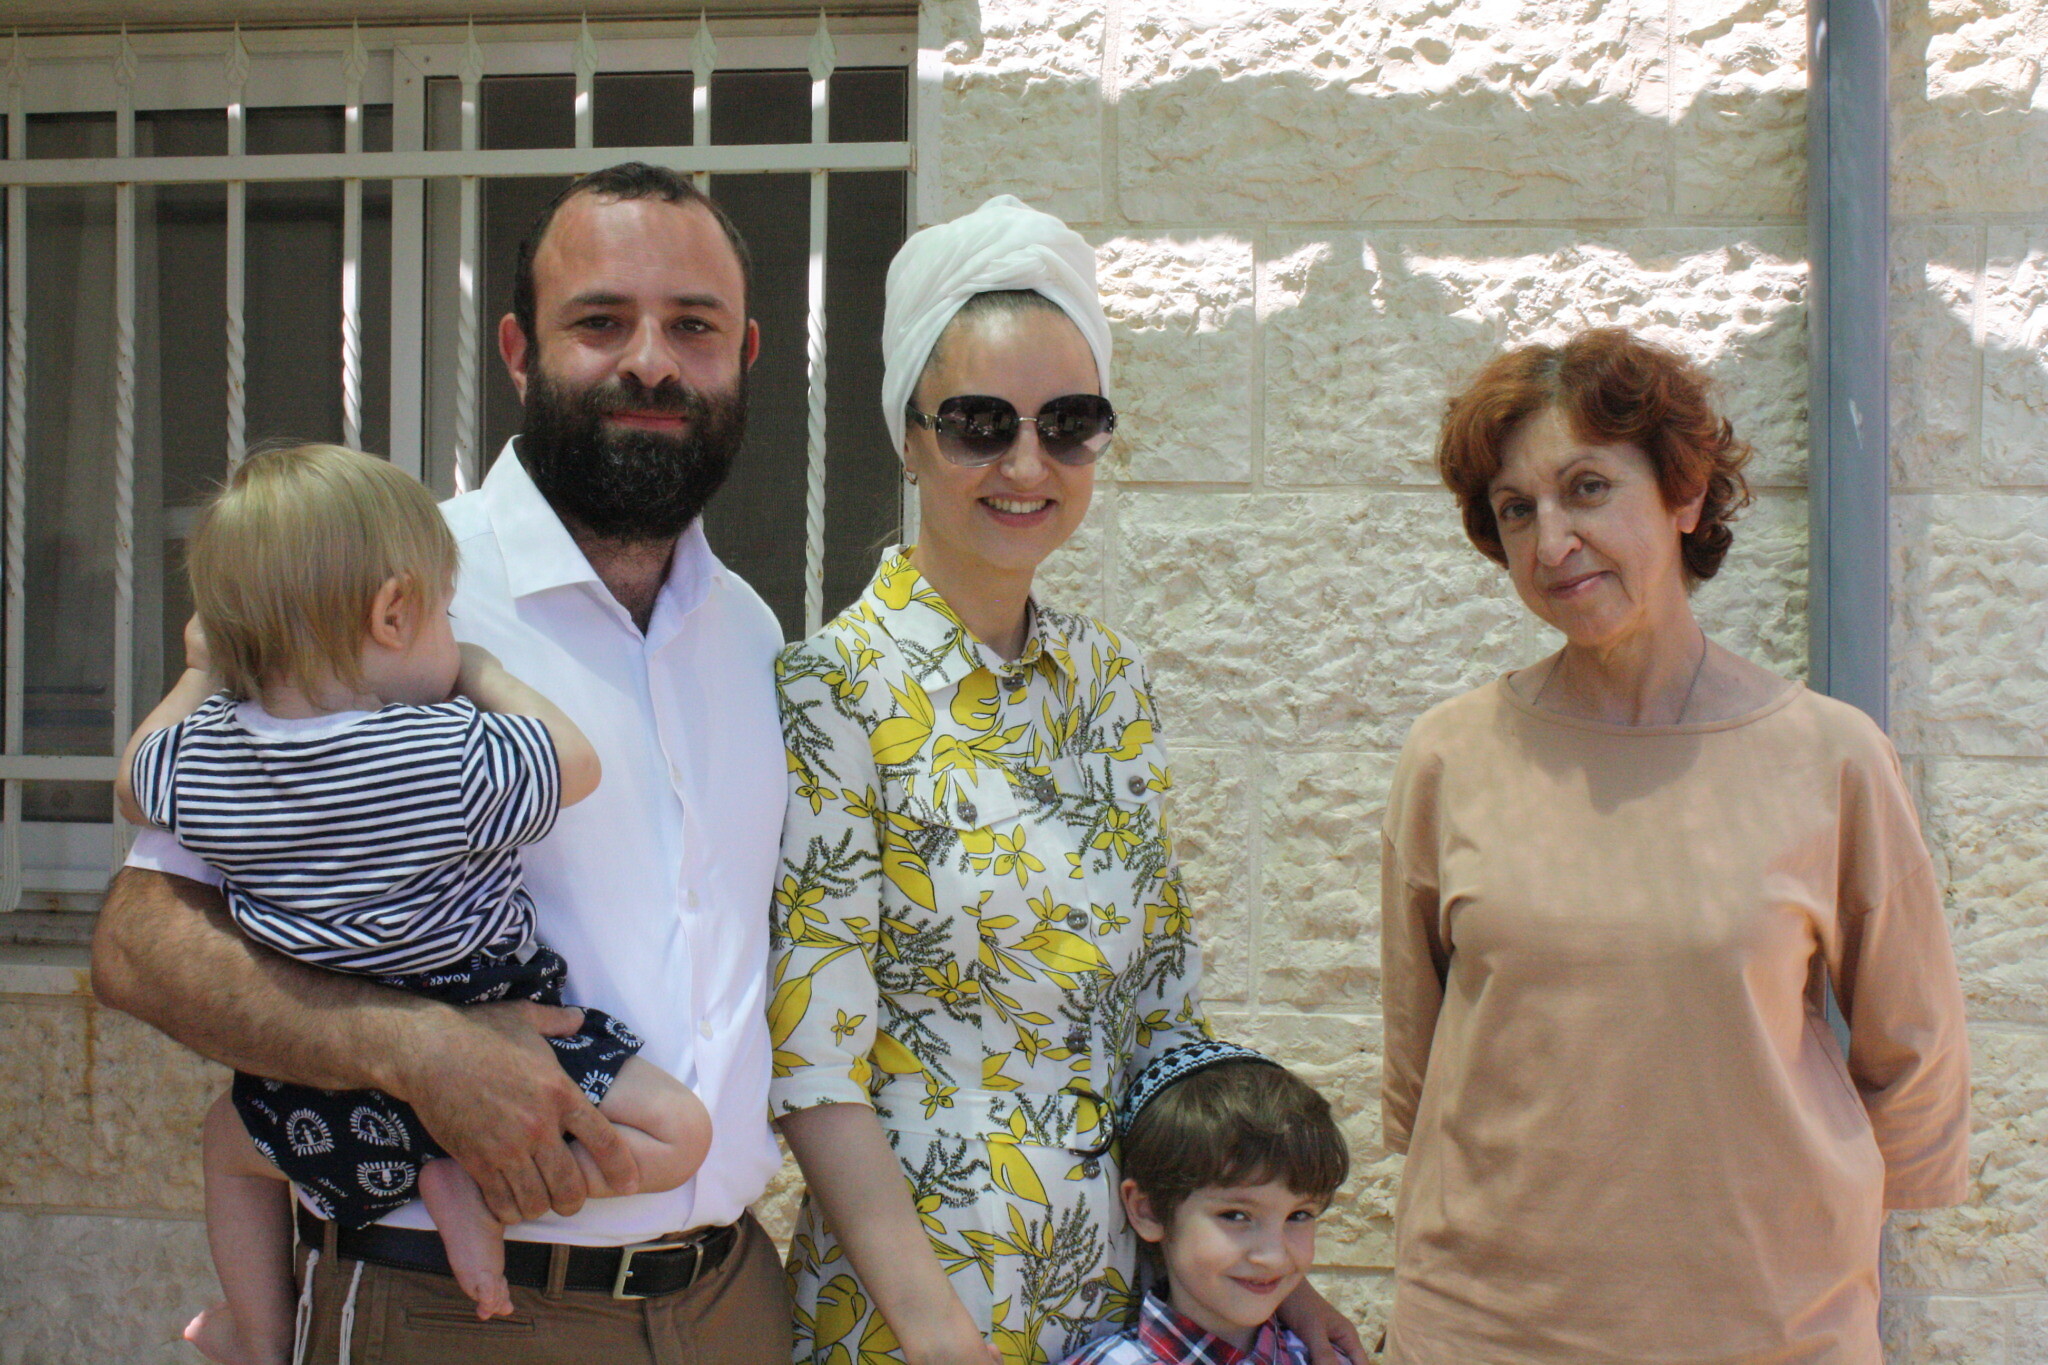 The Libenson family (from left): baby Yosef Zalman, Israel, Lea, Nathan, and Israel's mother Haya-Rina in the backyard of their new home in the settlement of Neve Daniel, some 15 kilometers south of Jerusalem. (Jeremy Sharon)